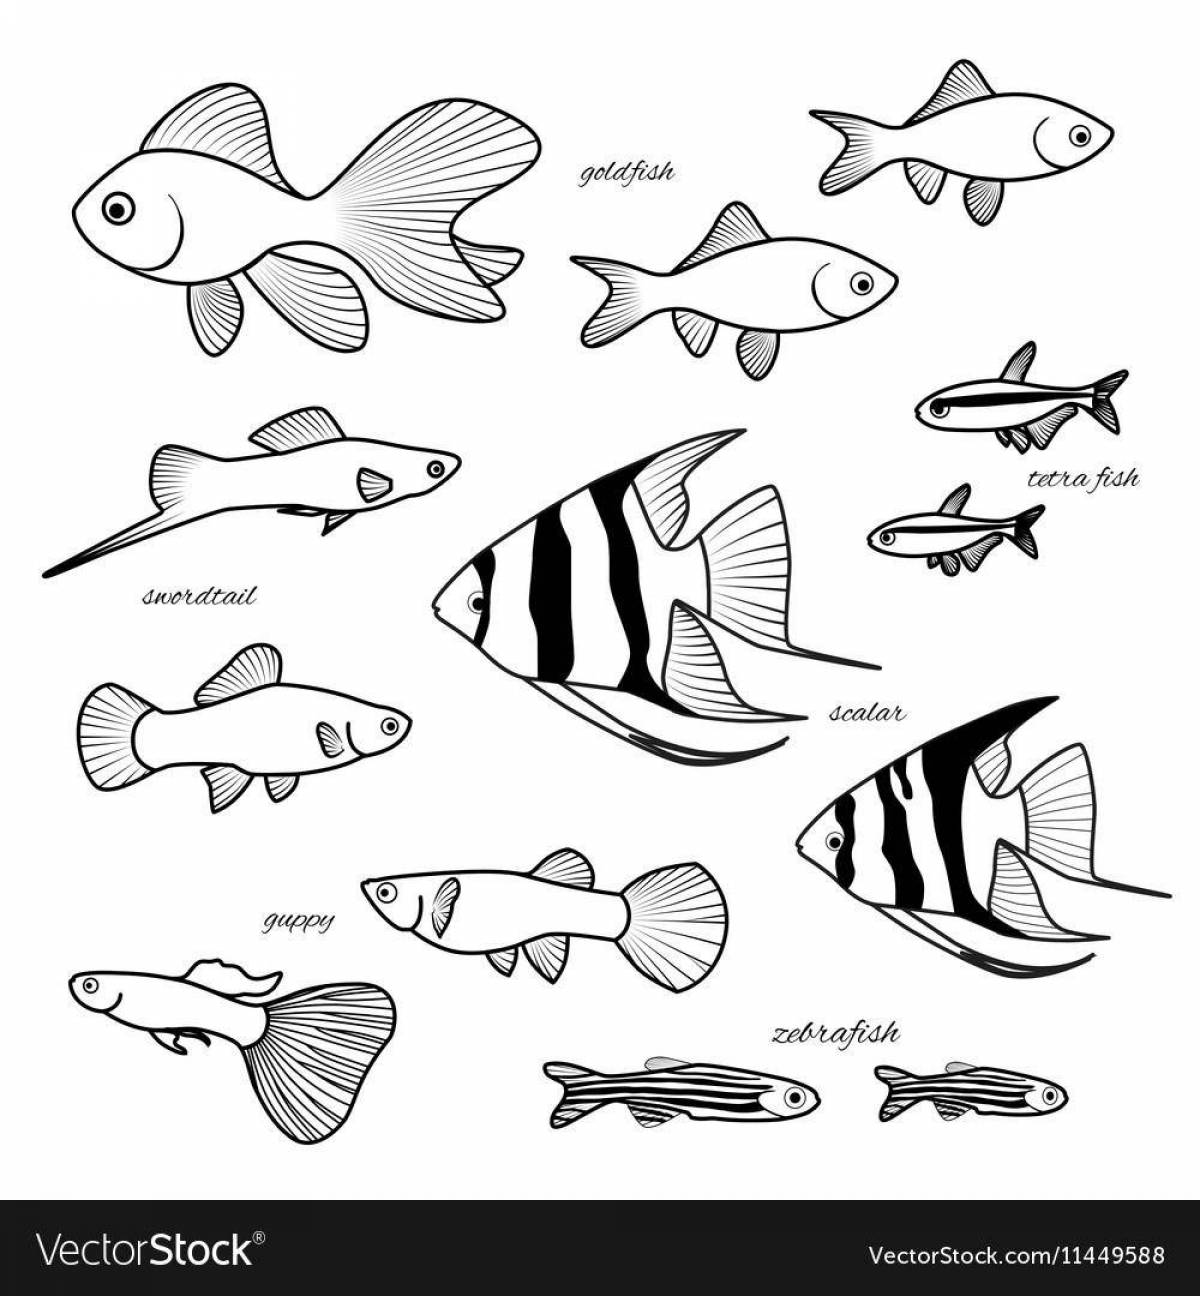 Guppy fish coloring page